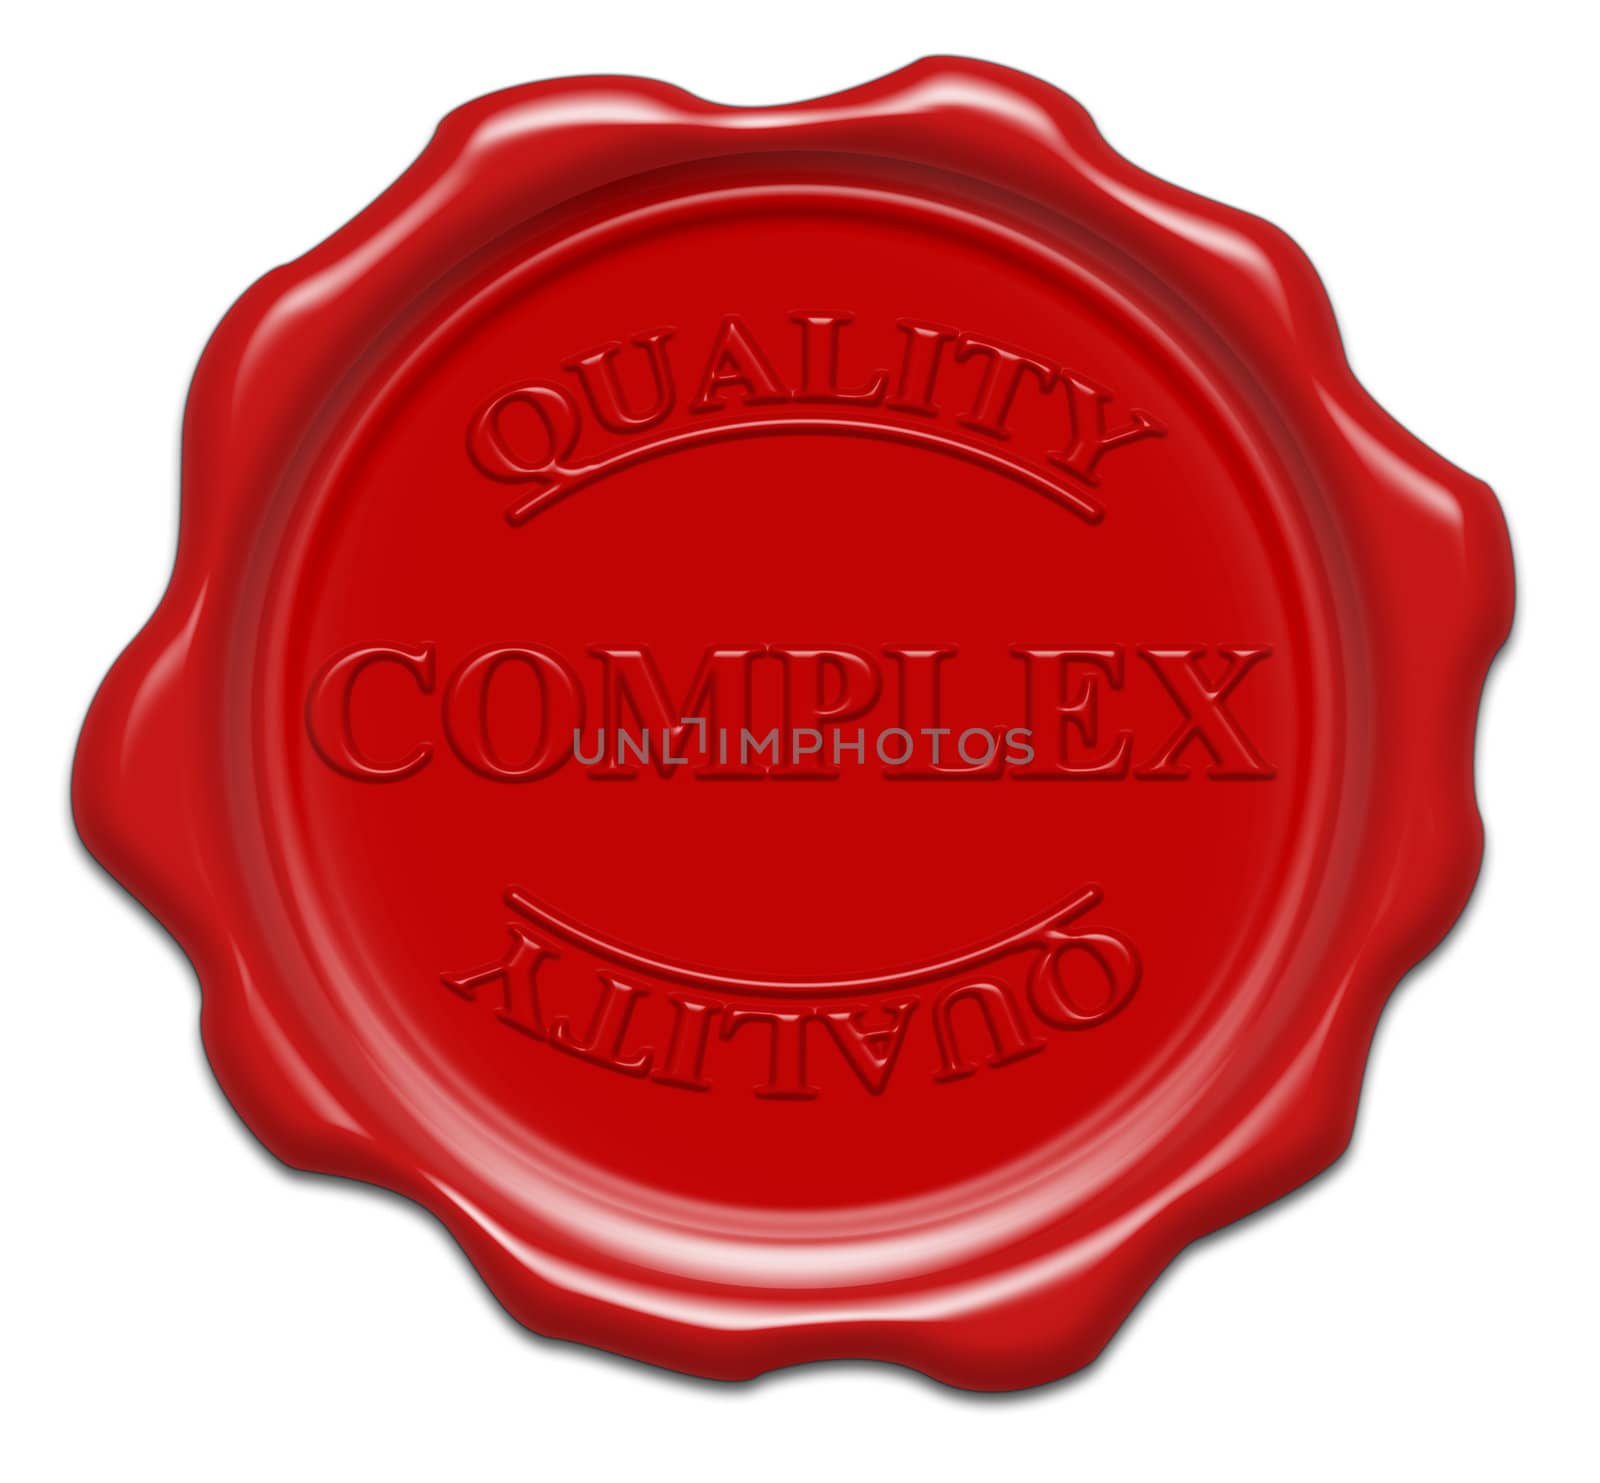 quality complex - illustration red wax seal isolated on white background with word : complex